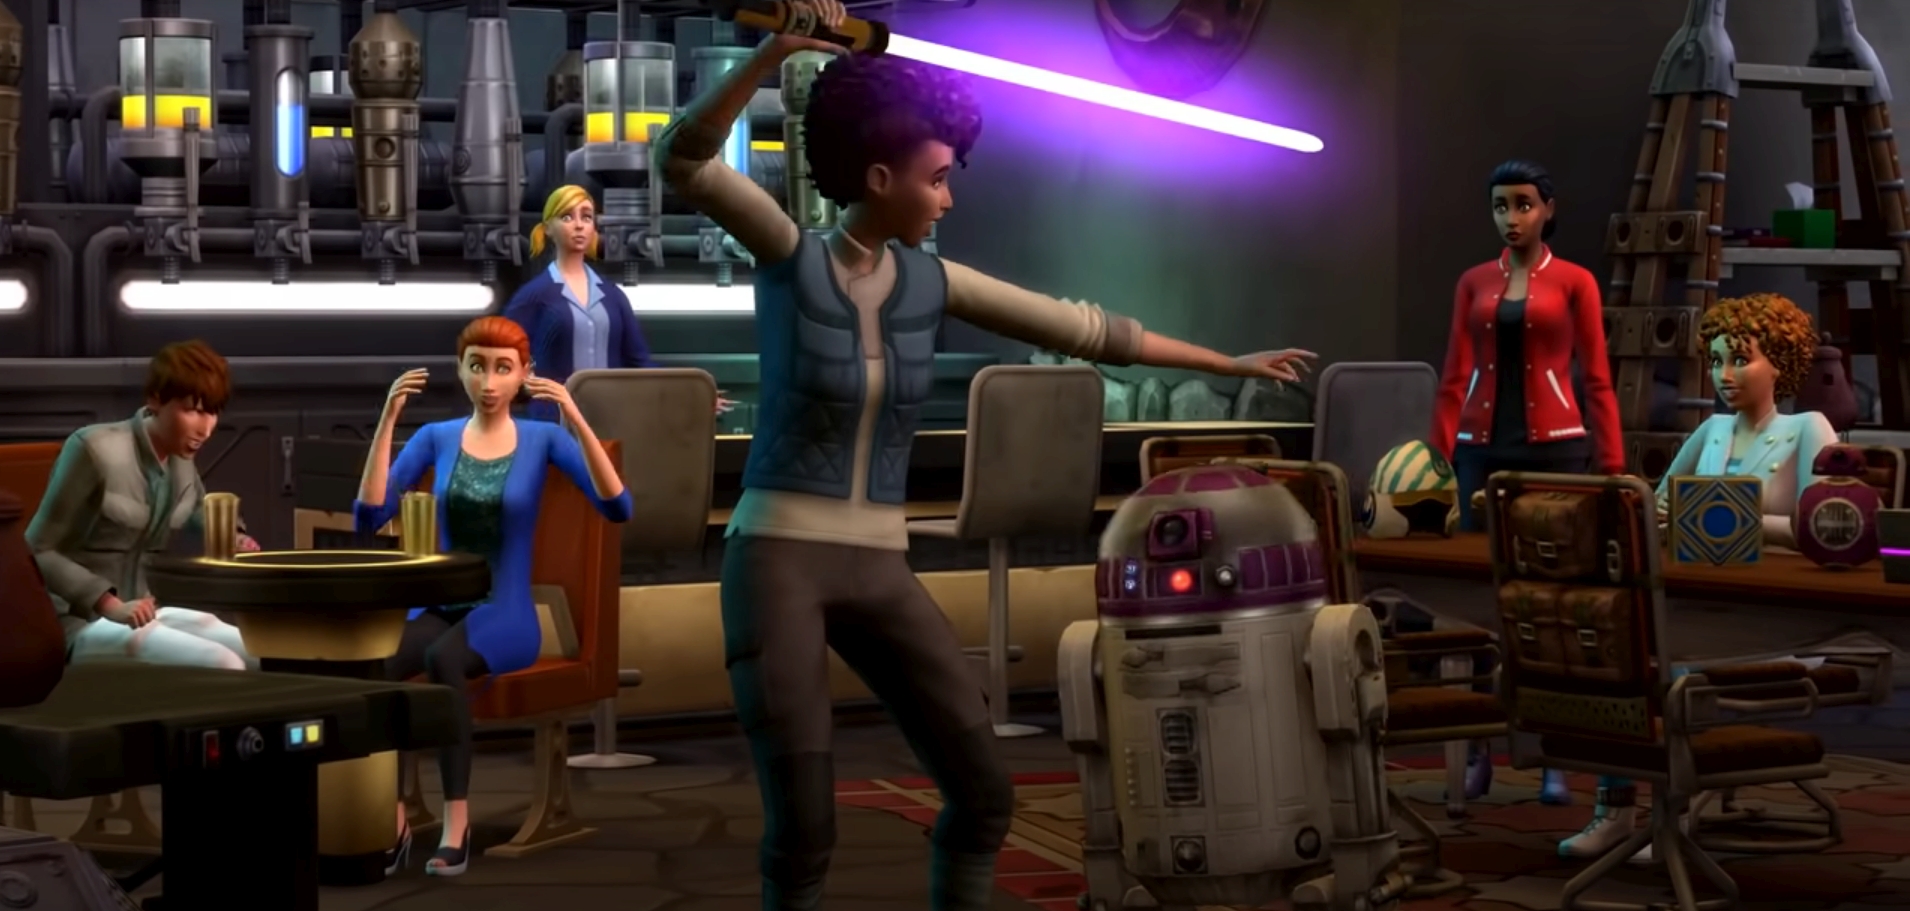 New Patch Available For The Sims 4 Ahead Of The Star Wars: Journey To Batuu Game Pack